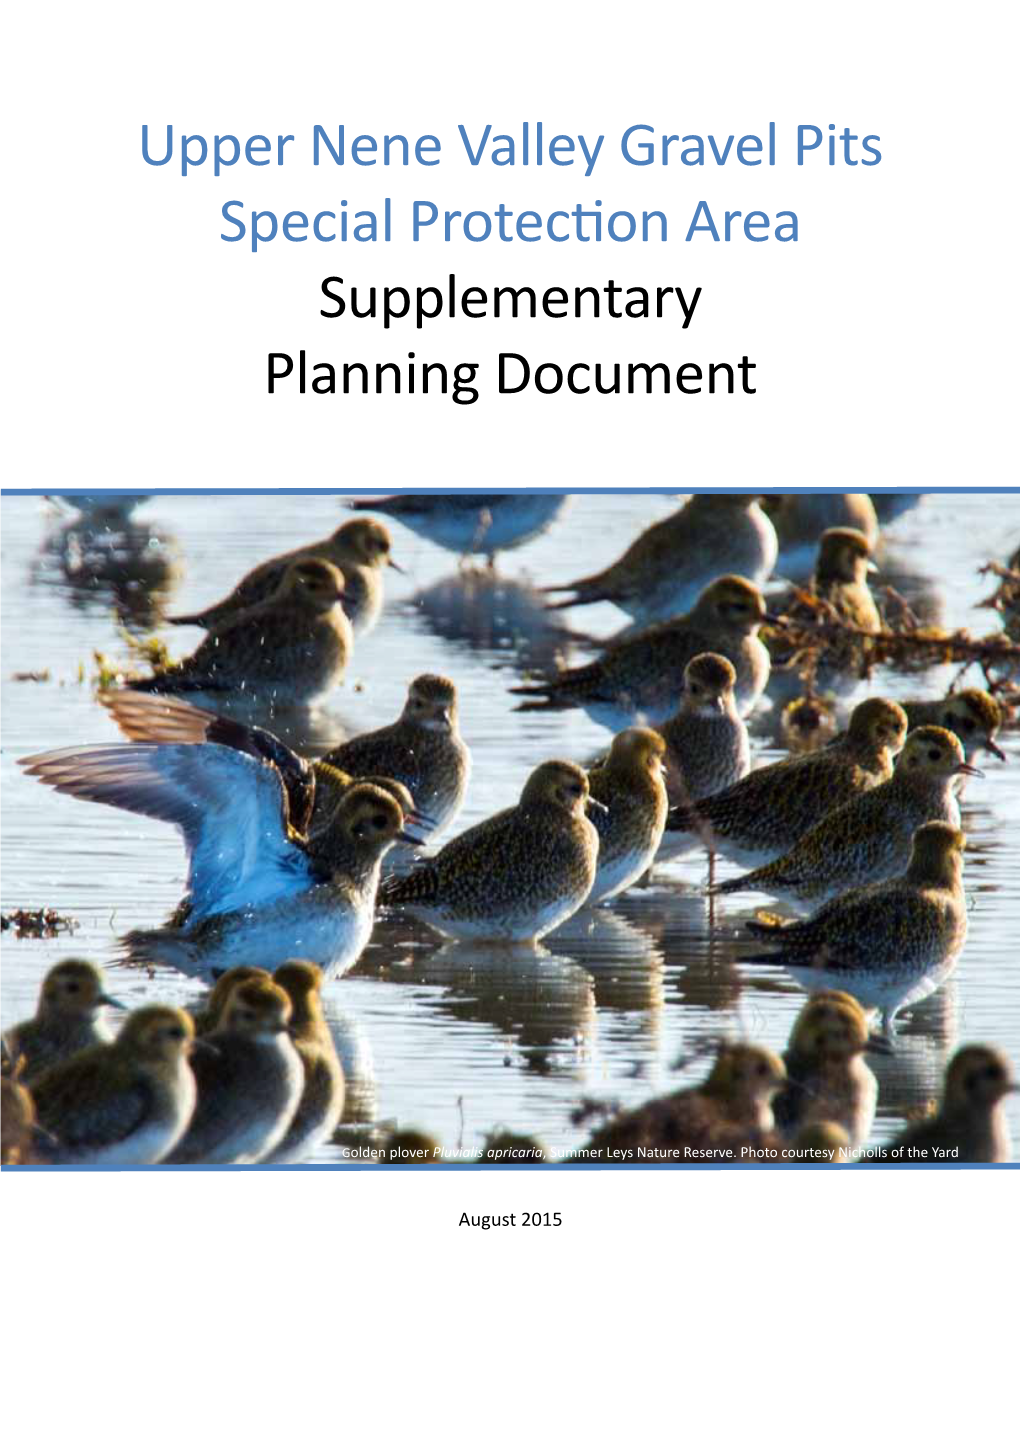 Upper Nene Valley Gravel Pits Special Protection Area Supplementary Planning Document